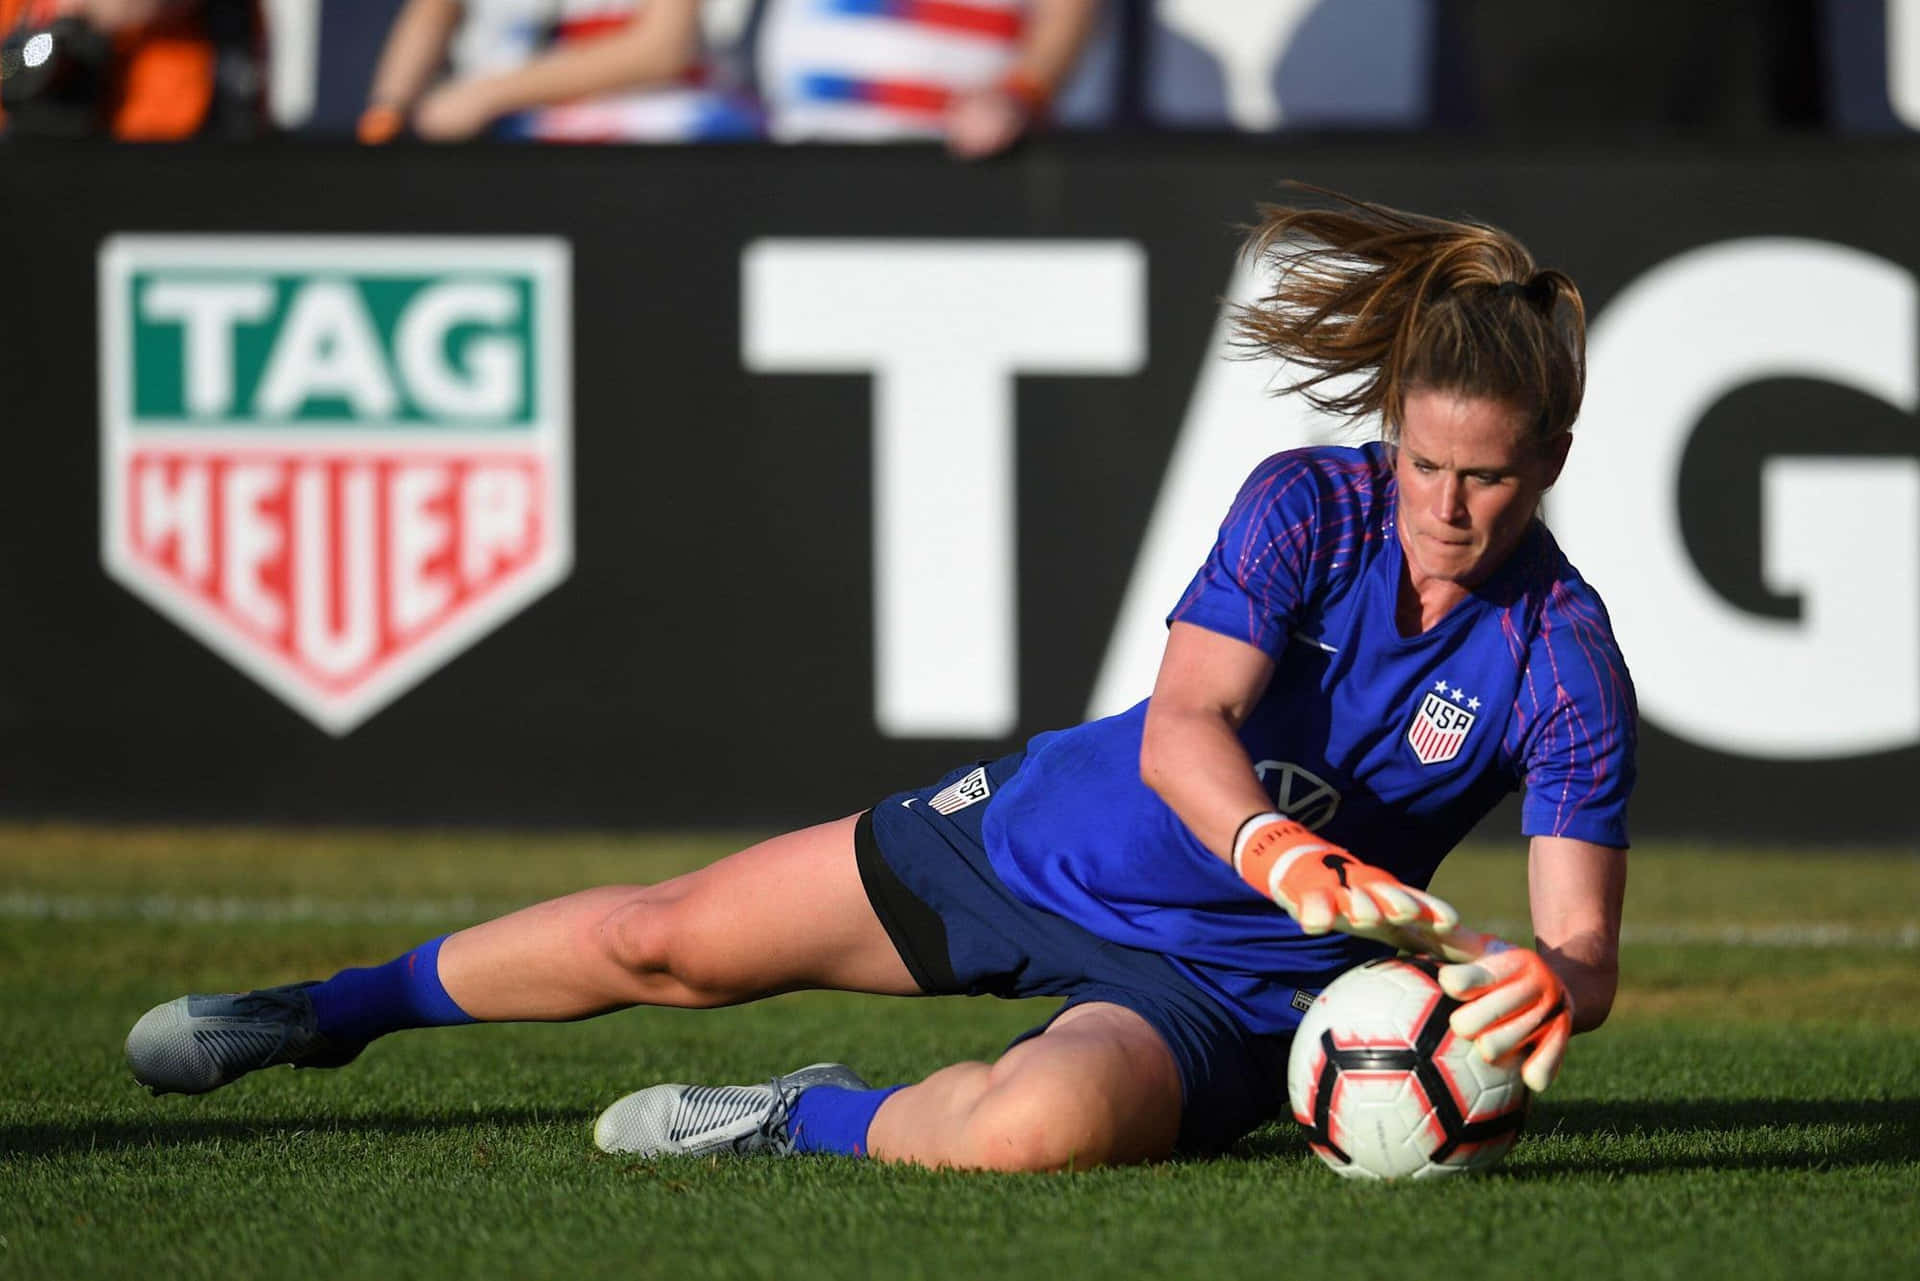 Caption: Magnificent Save By Alyssa Naeher Wallpaper